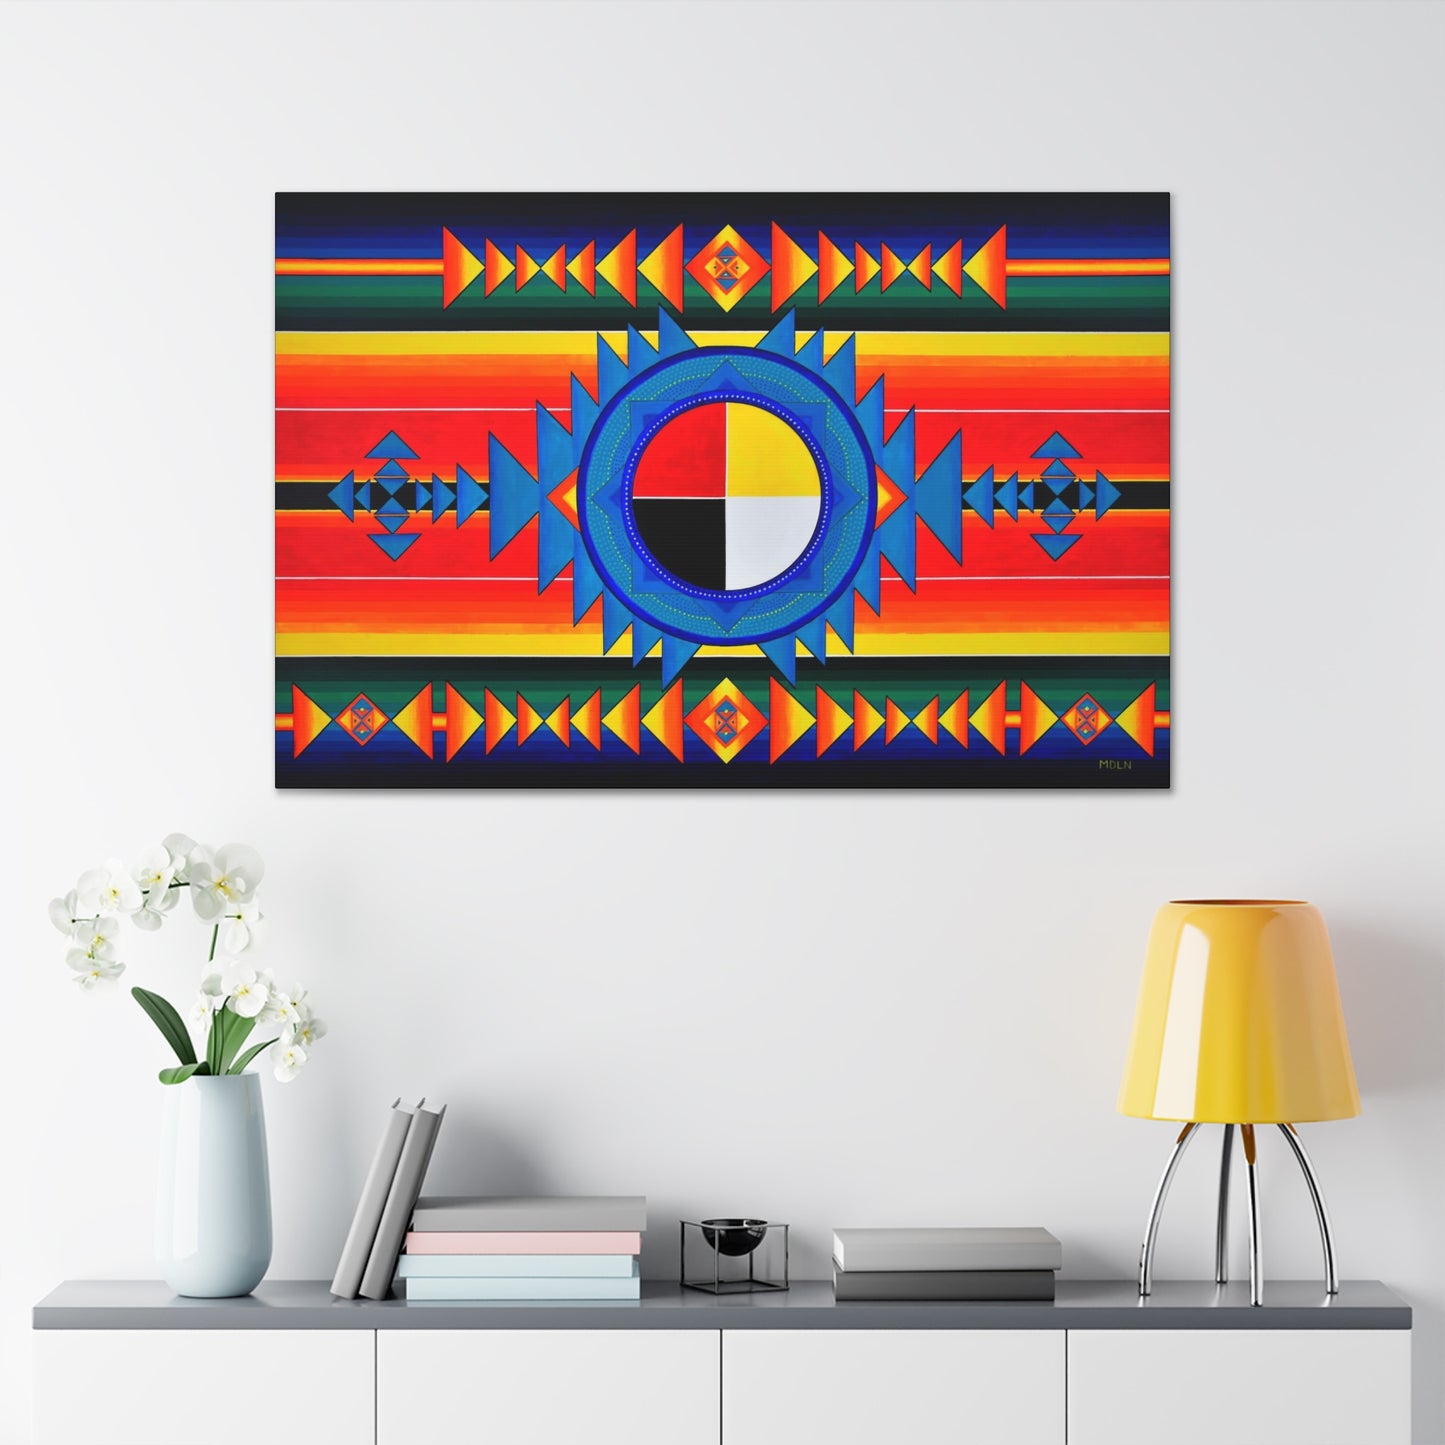 A colorful Indigenous Medicine Wheel art print on canvas hanging on the wall over some cabinets